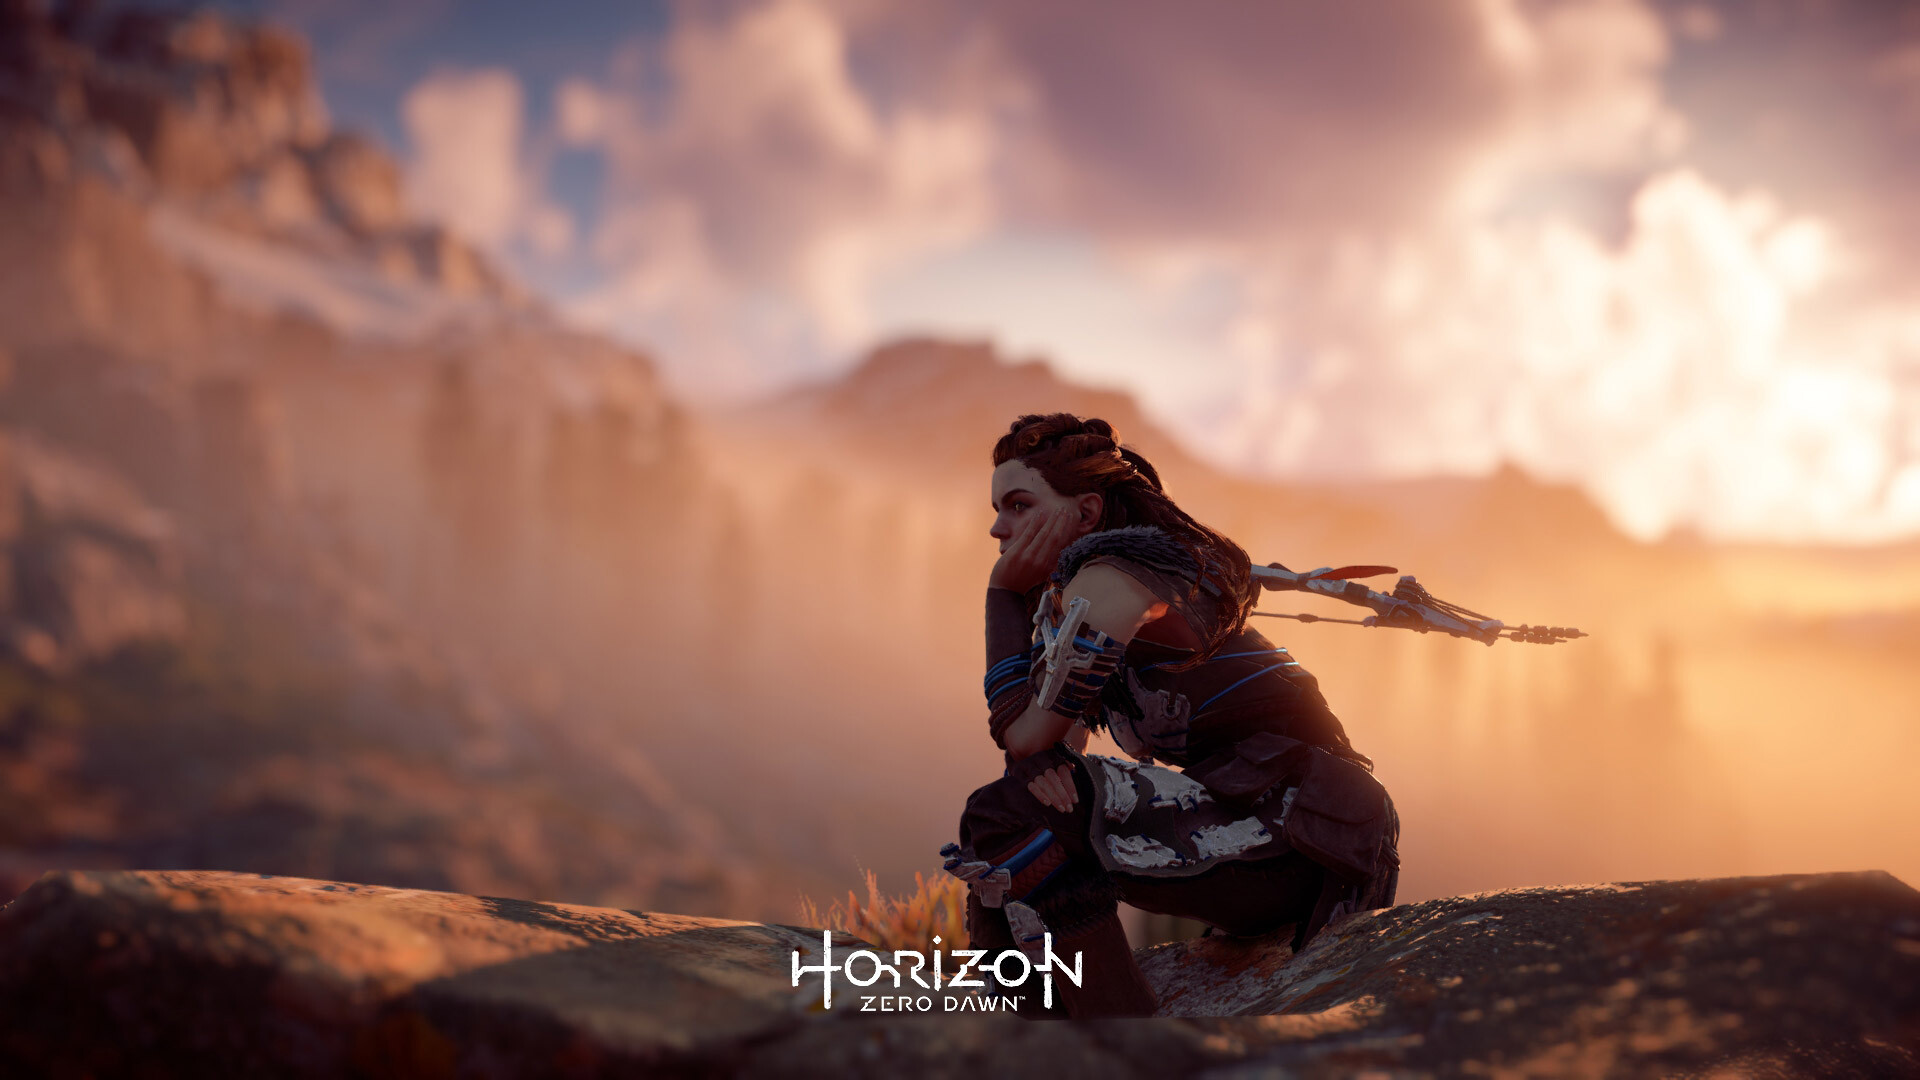 Horizon Zero Dawn: An action/role-playing game in which players assume the role of a hunter surviving through a post-apocalyptic world. 1920x1080 Full HD Background.